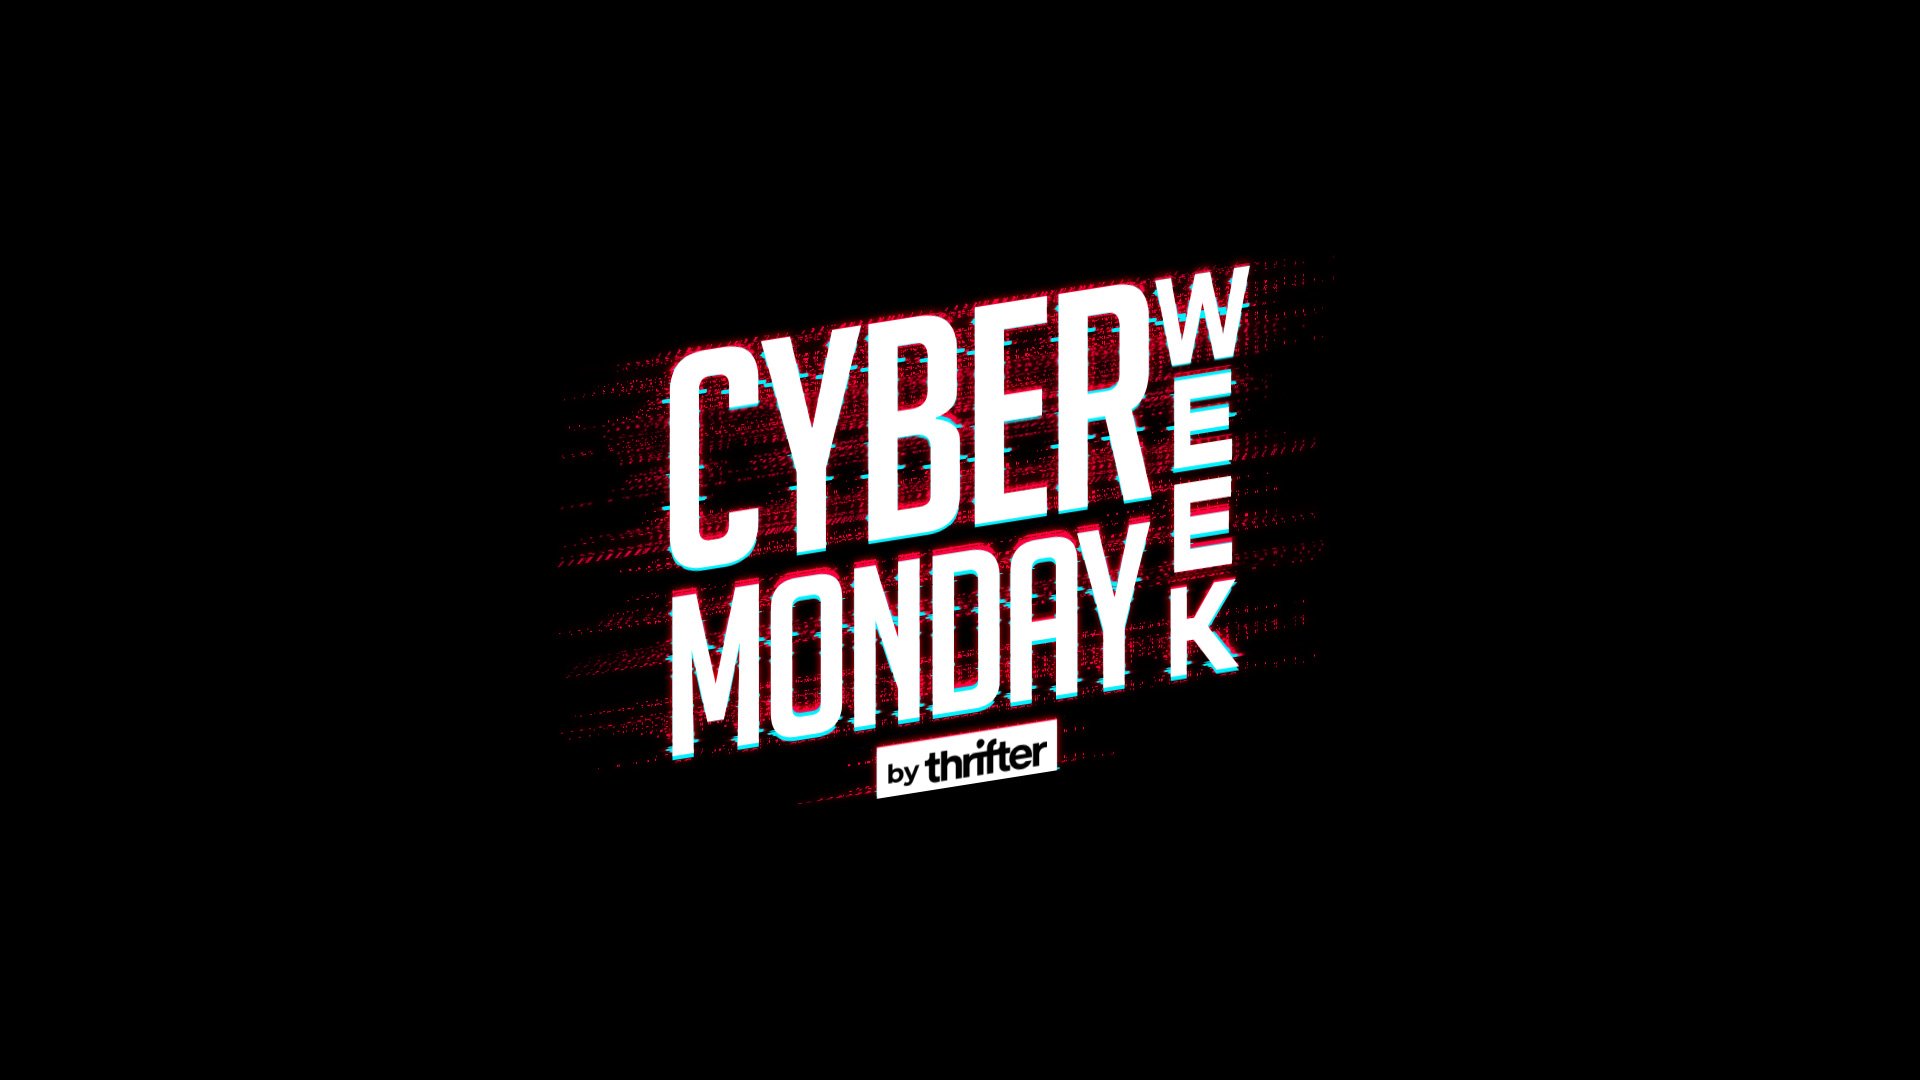 Best Australia Cyber Monday Deals In 2019 Android Central